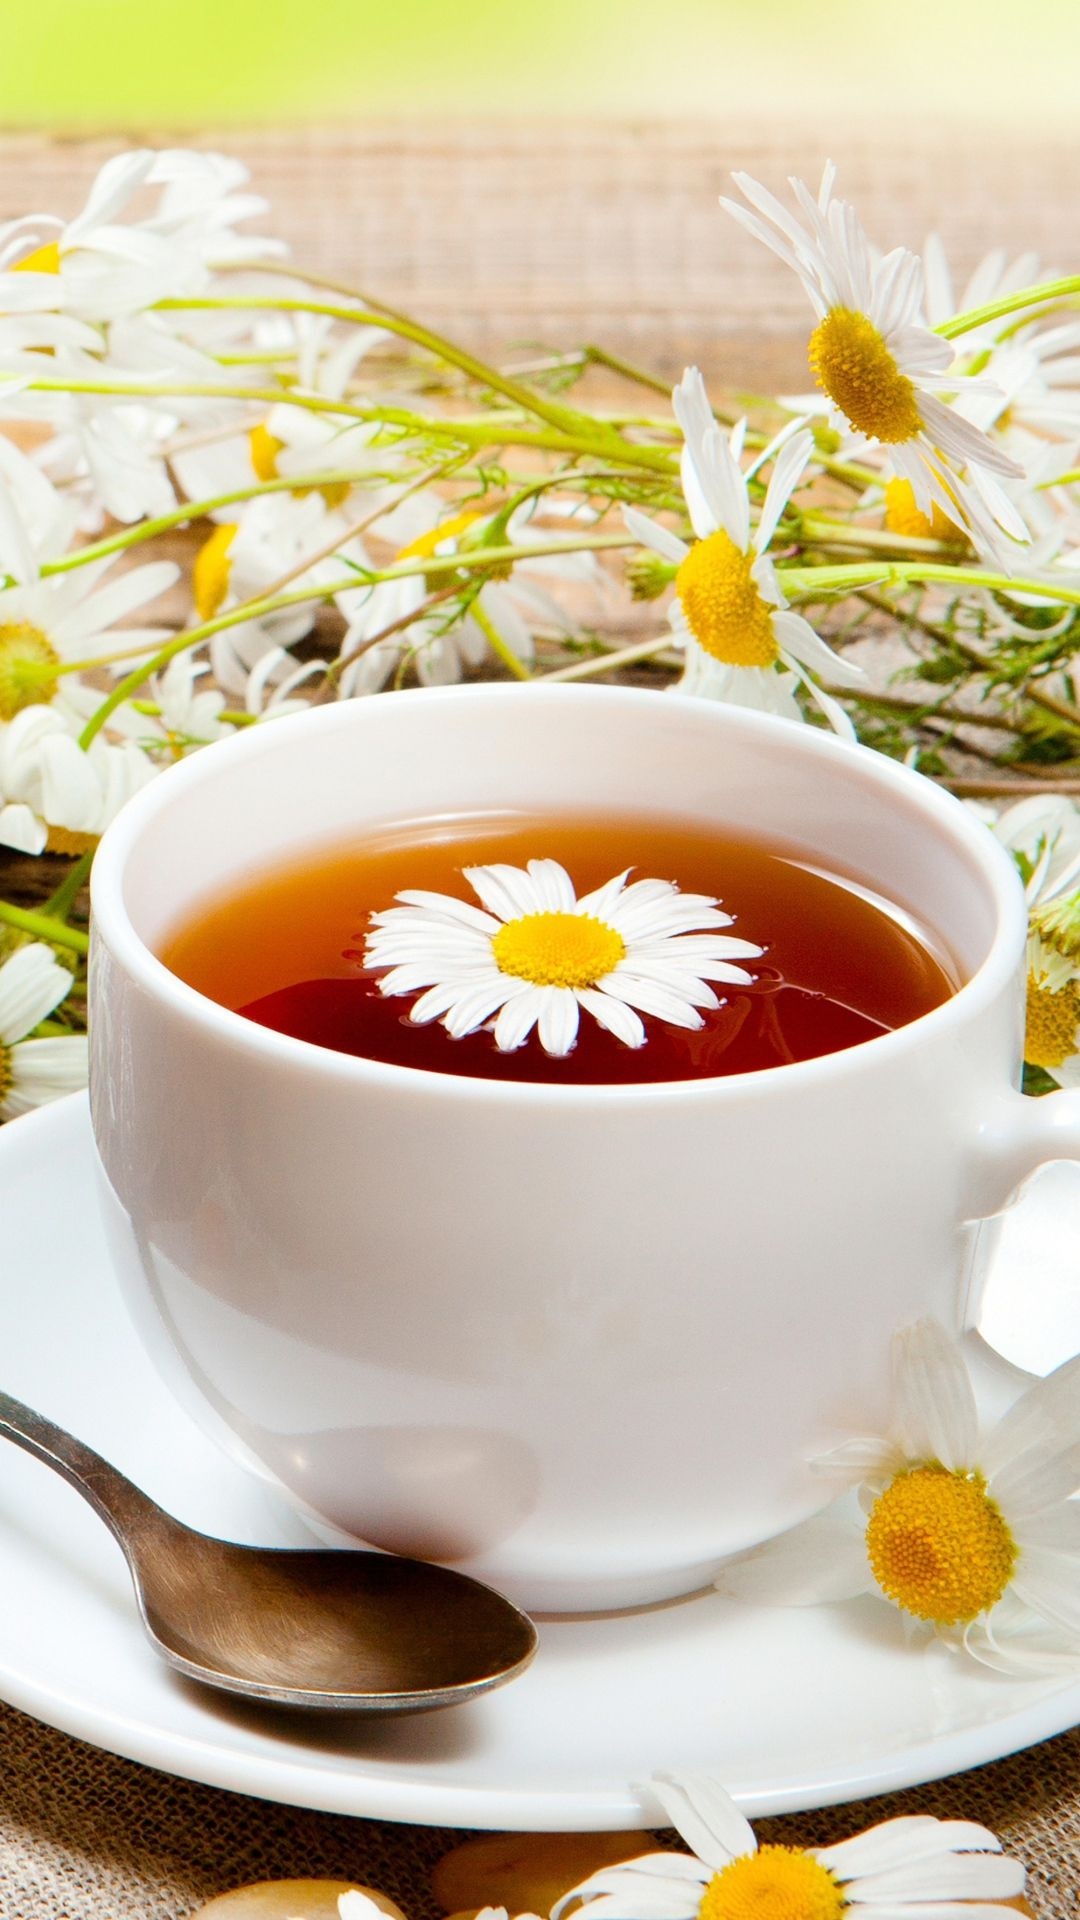 Tea: Saucer, Chamomile, Herbal drink, a natural remedy for a wide range of health issues, Spoon, Mug. 1080x1920 Full HD Background.